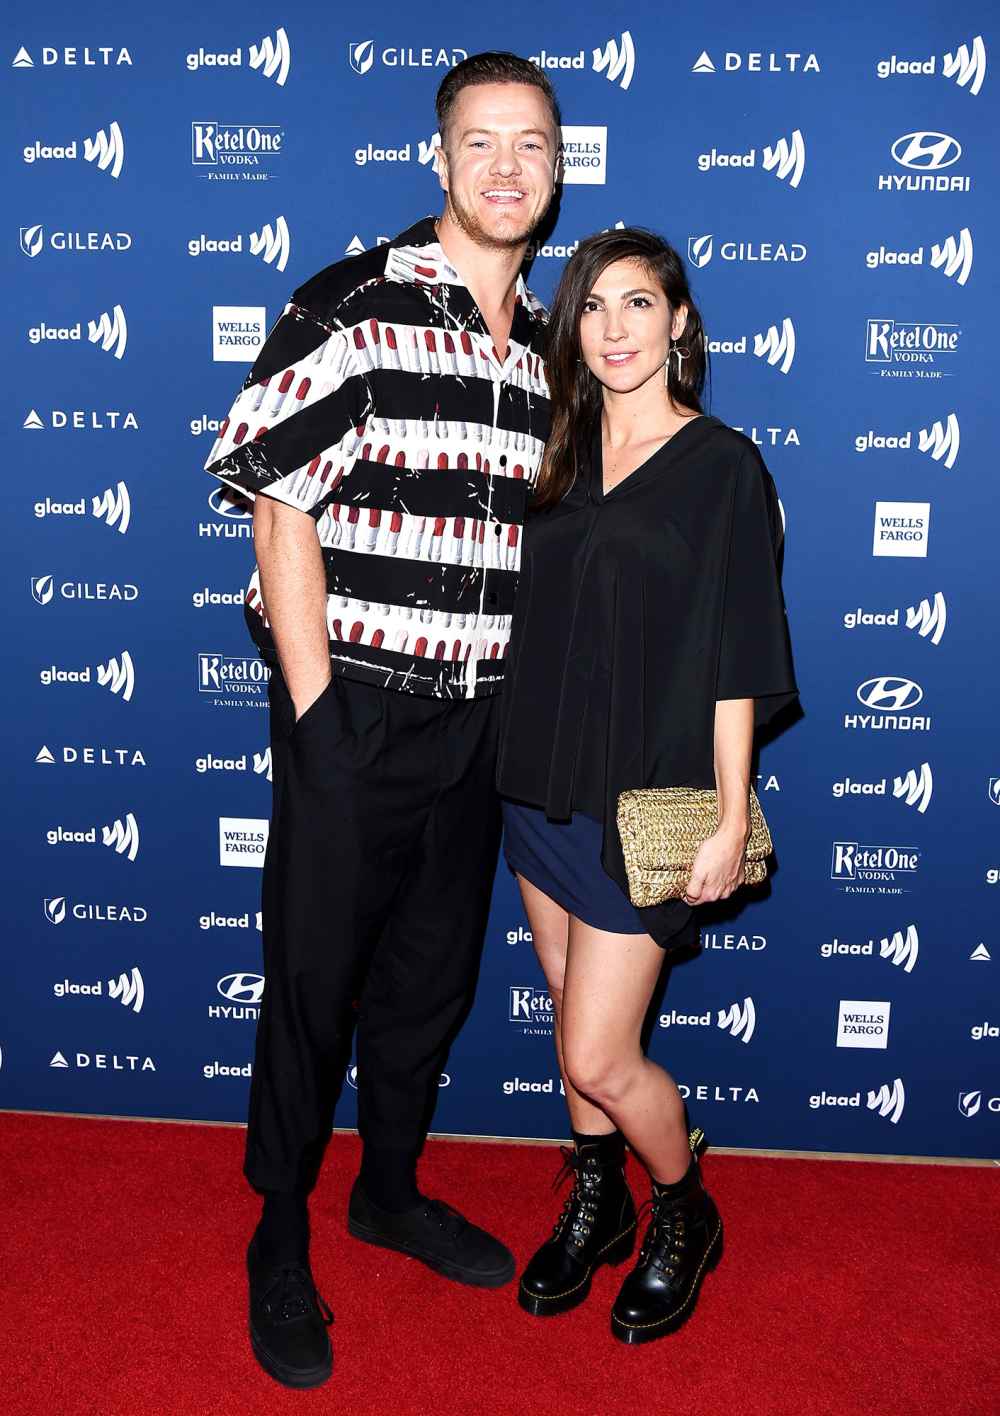 Dan Reynolds and Aja Volkman Imagine Dragons’ Dan Reynolds Reveals He and His Wife Are Expecting Baby Boy 1 Year After Separation